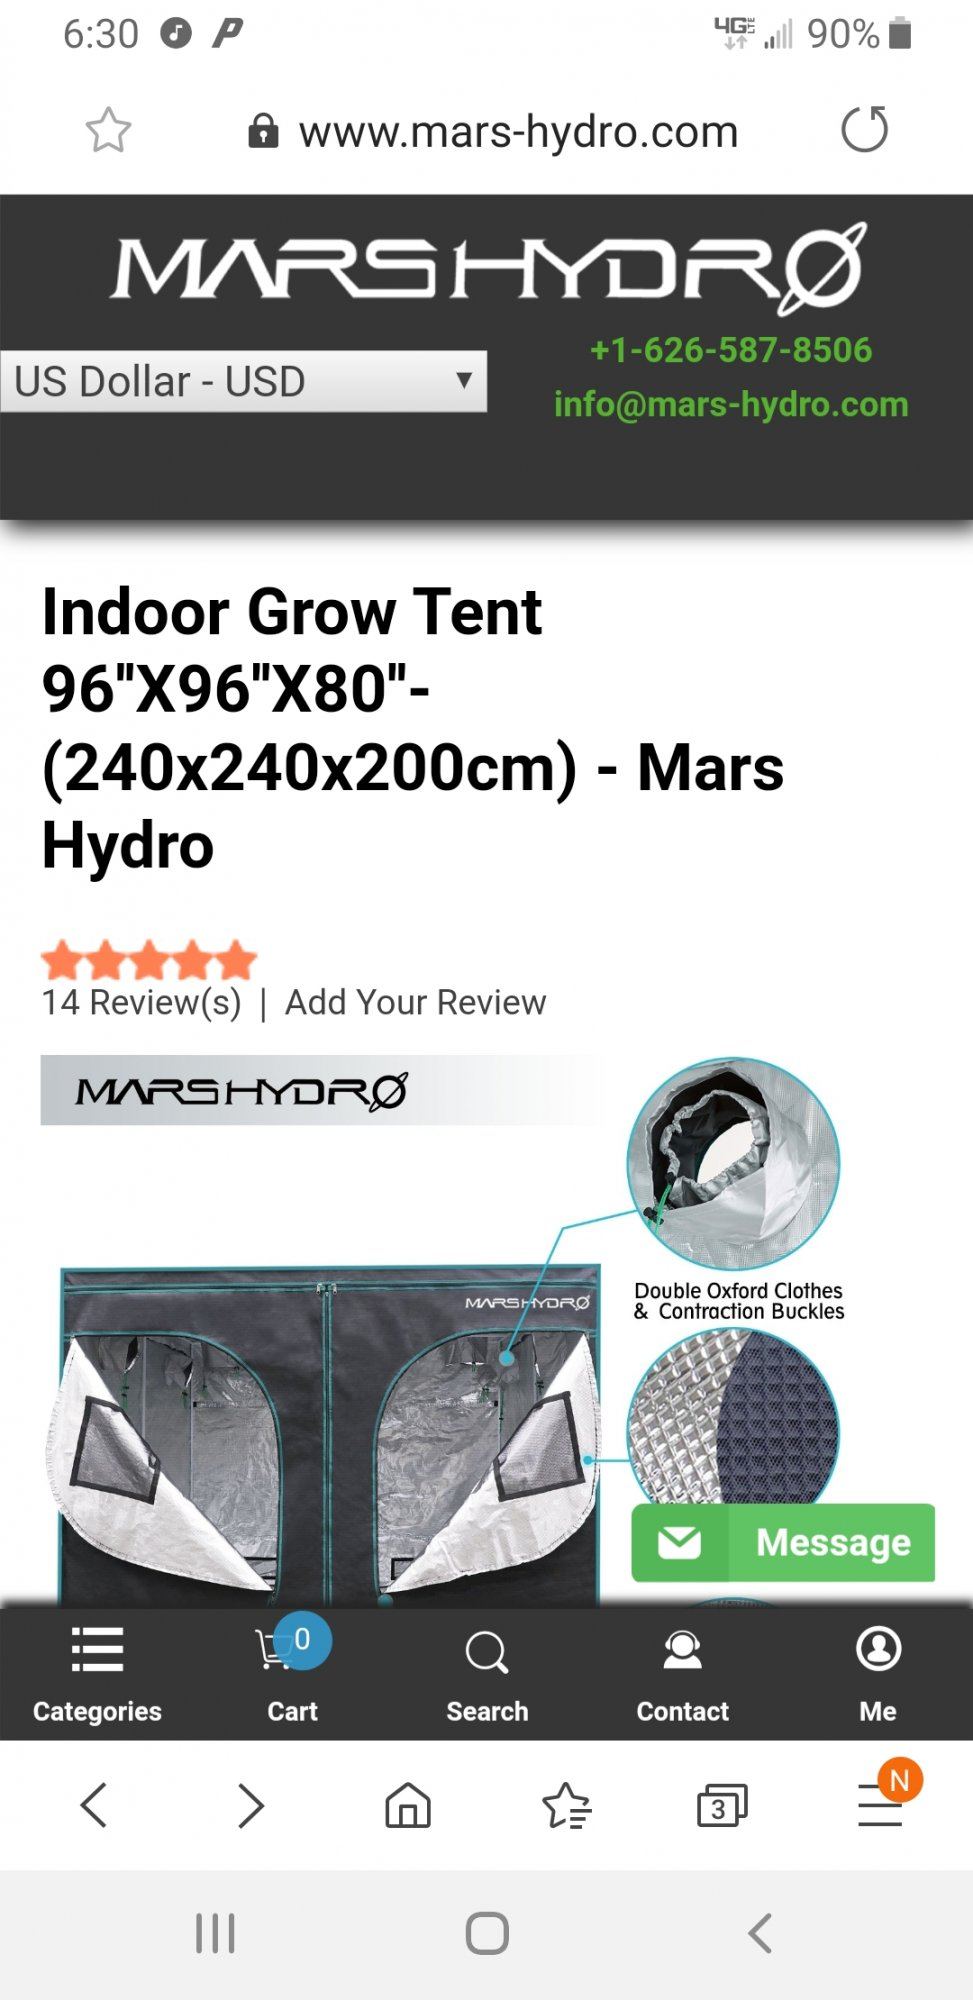 What from your opinions is the best tent